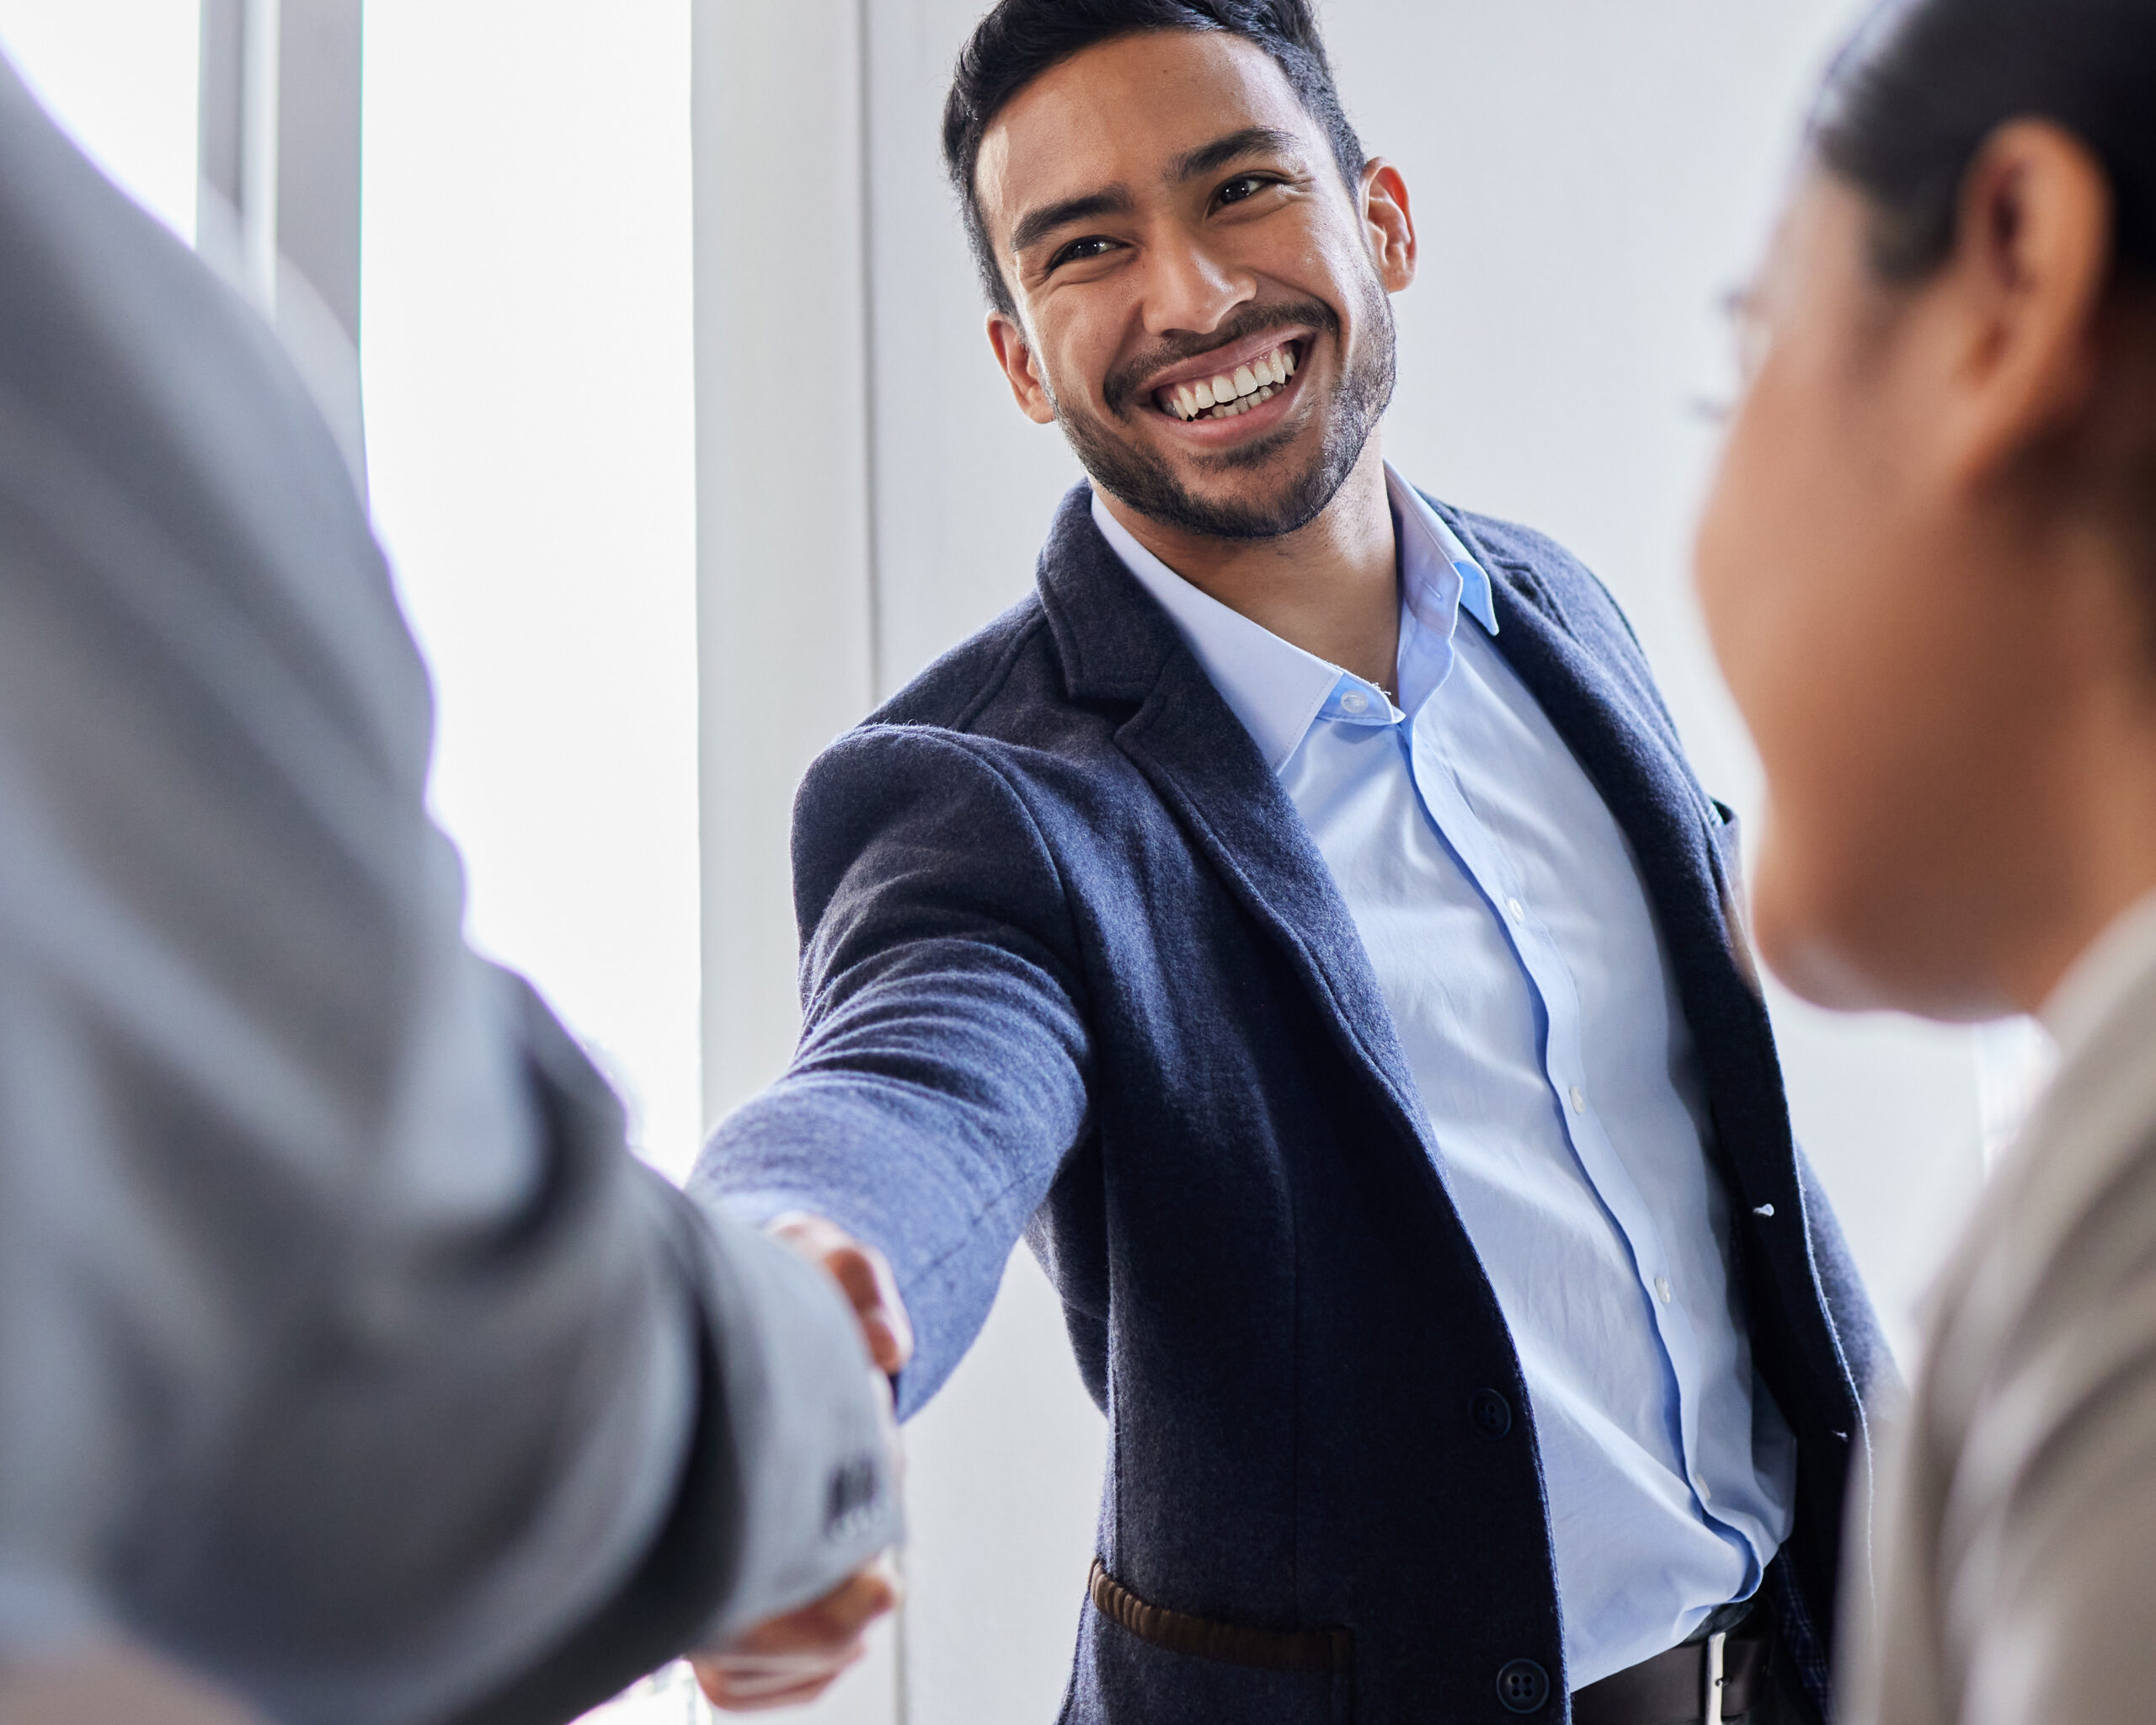 Meeting, smile and handshake with business people in office, b2b deal or agreement for startup opportunity. Hand shake, partnership and welcome, happy businessman shaking hands for onboarding support.